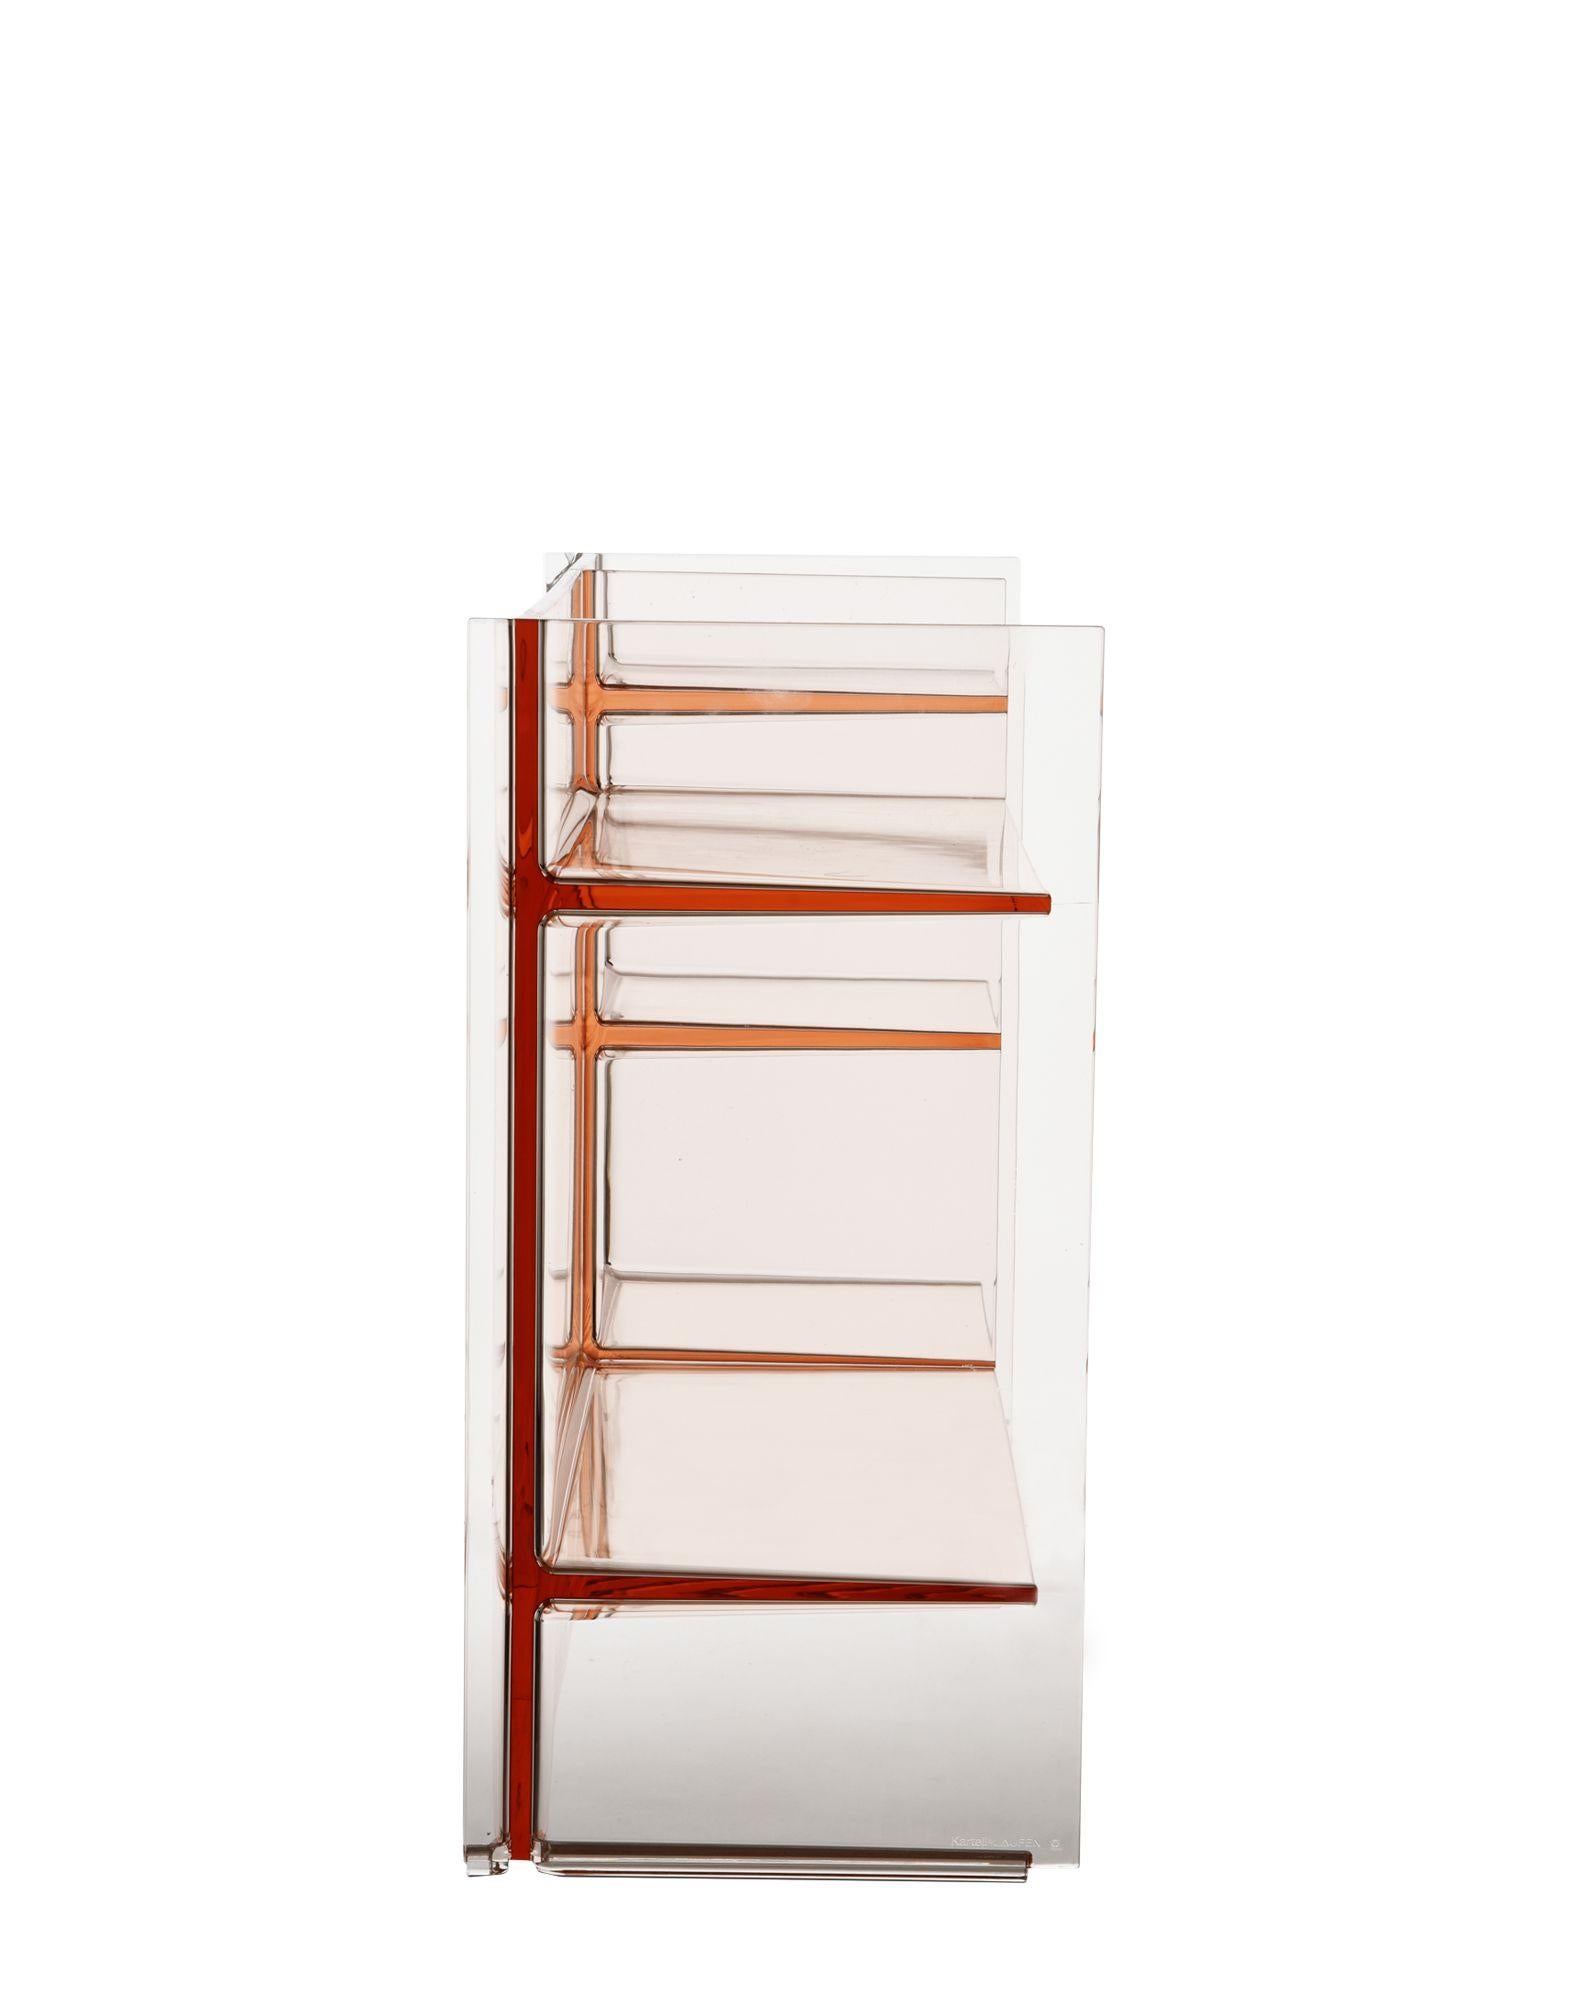 Modern Kartell Sound Rack Modular Bookcase in Nude by Ludovica and Roberto Palomba For Sale